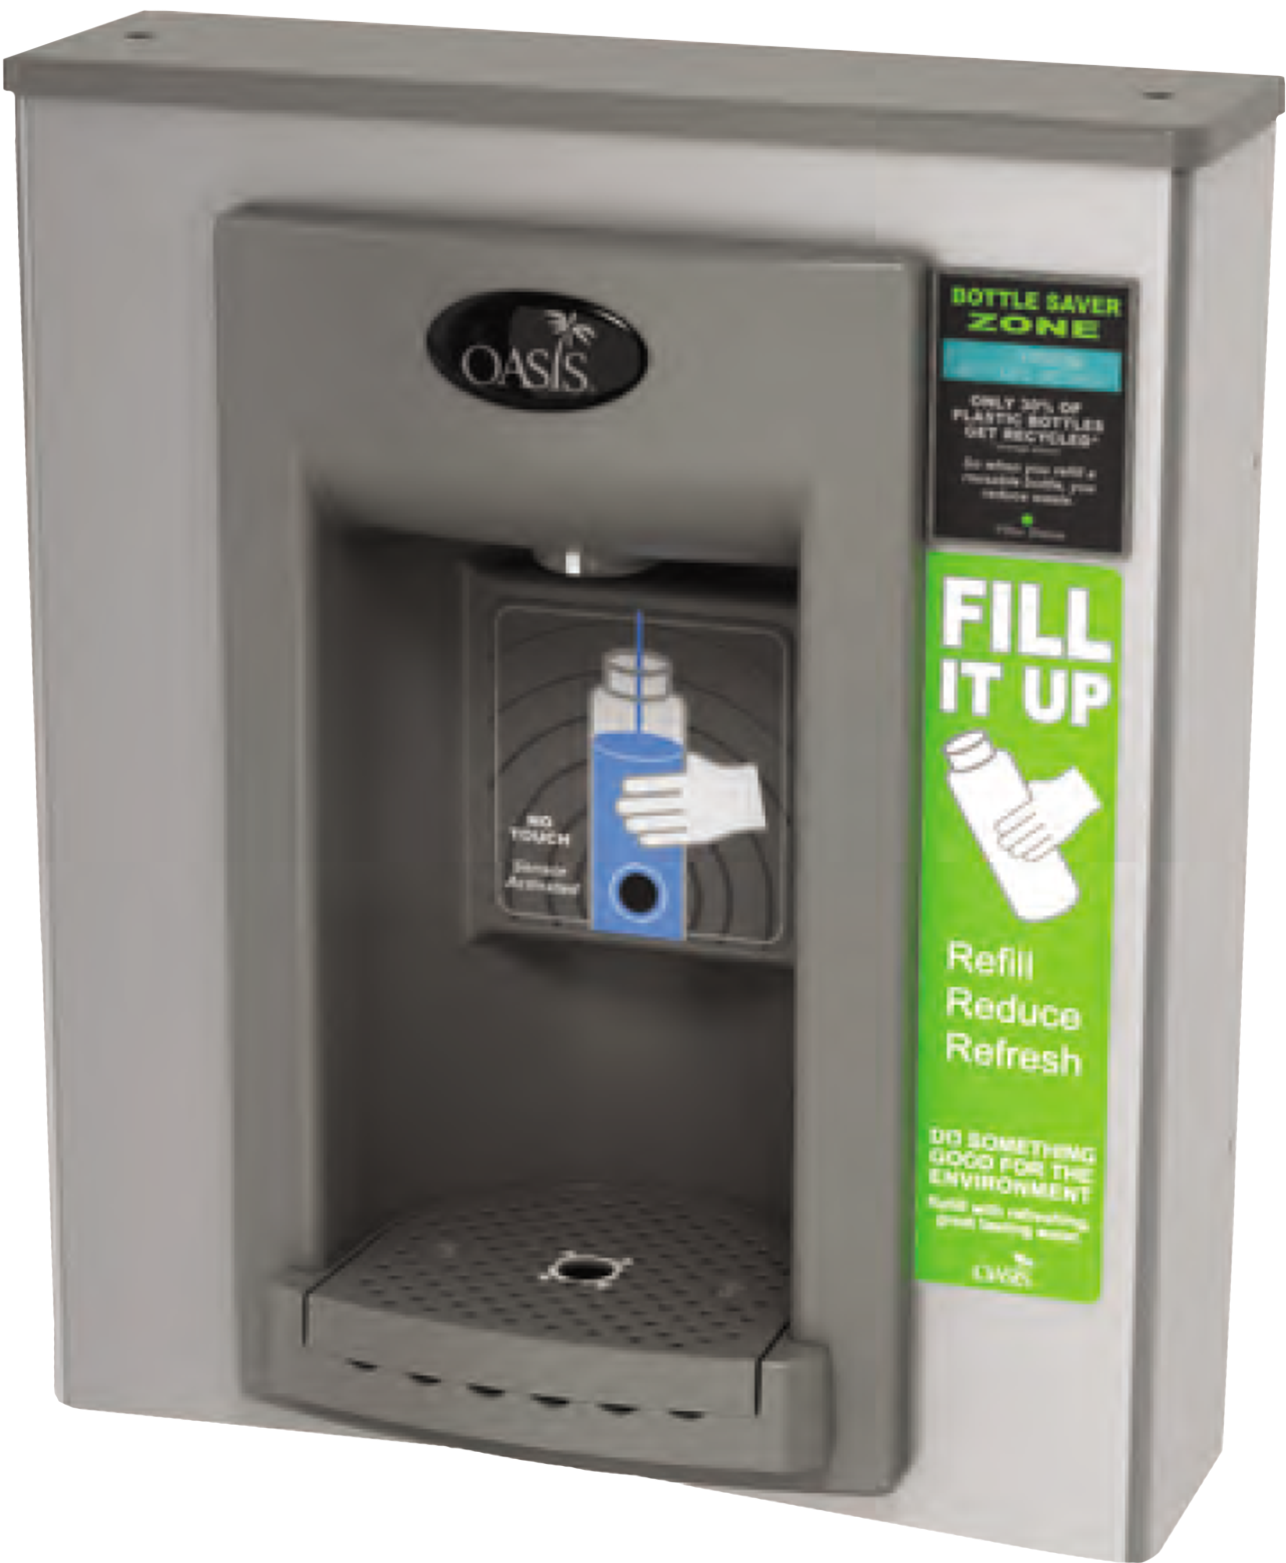 Oasis Water Refill Station Image